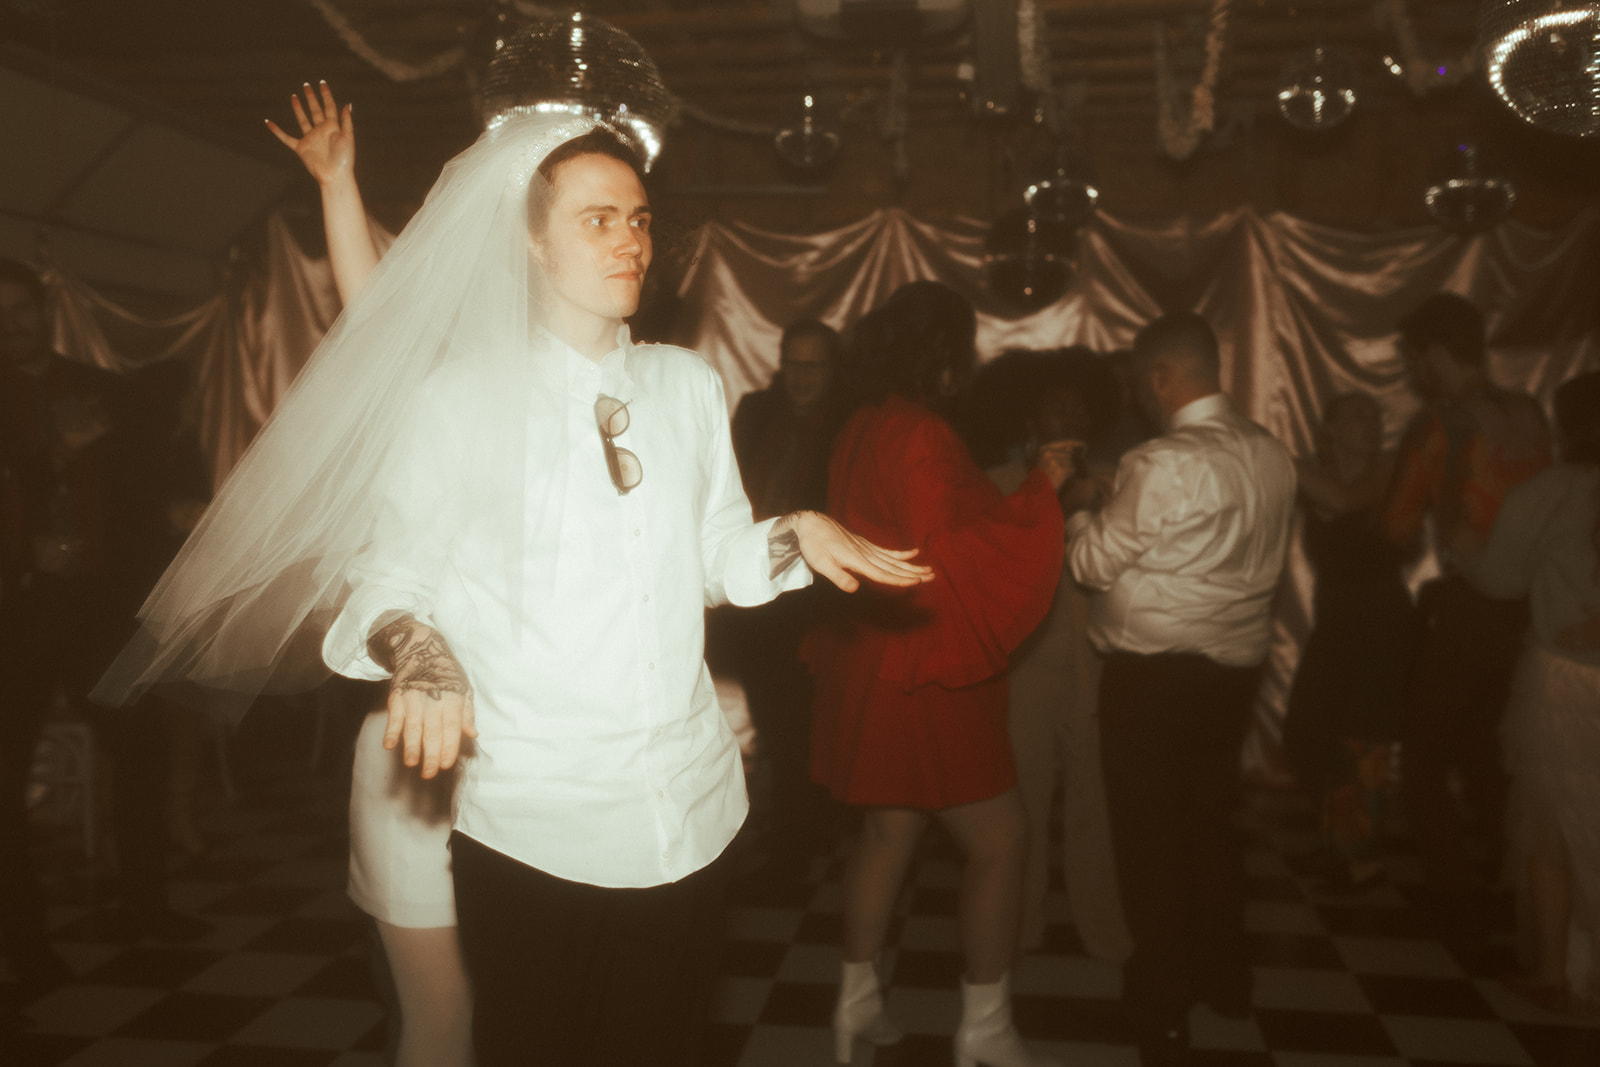 guy with brides veil on in funny wedding photo